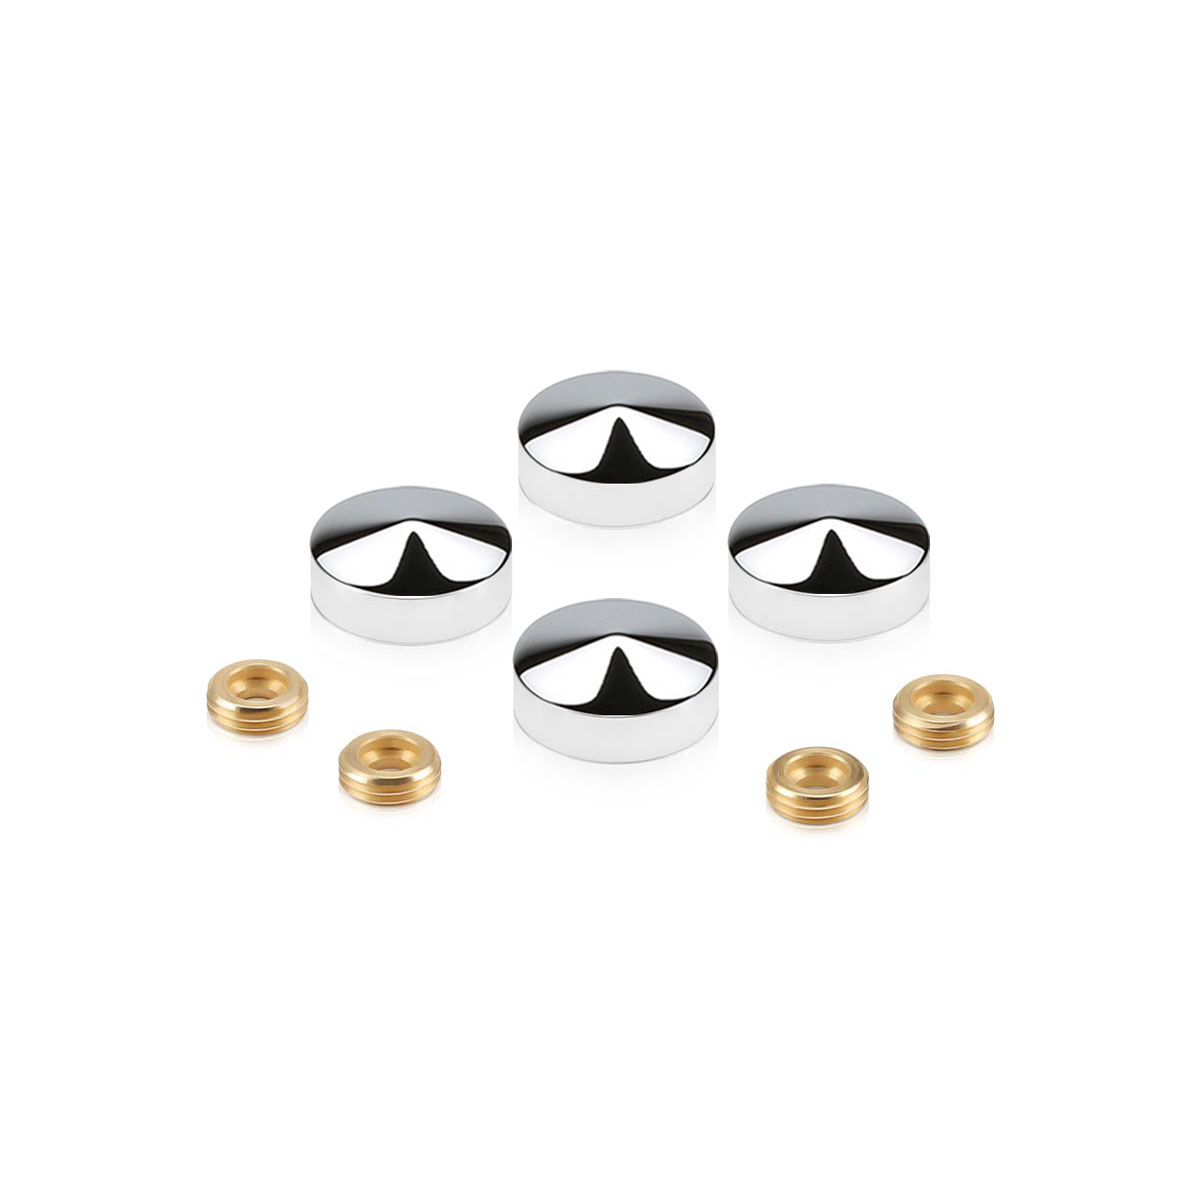 Set of Conical Screw Cover Diameter 13/16'', Polished Stainless Steel Finish (Indoor Use Only)